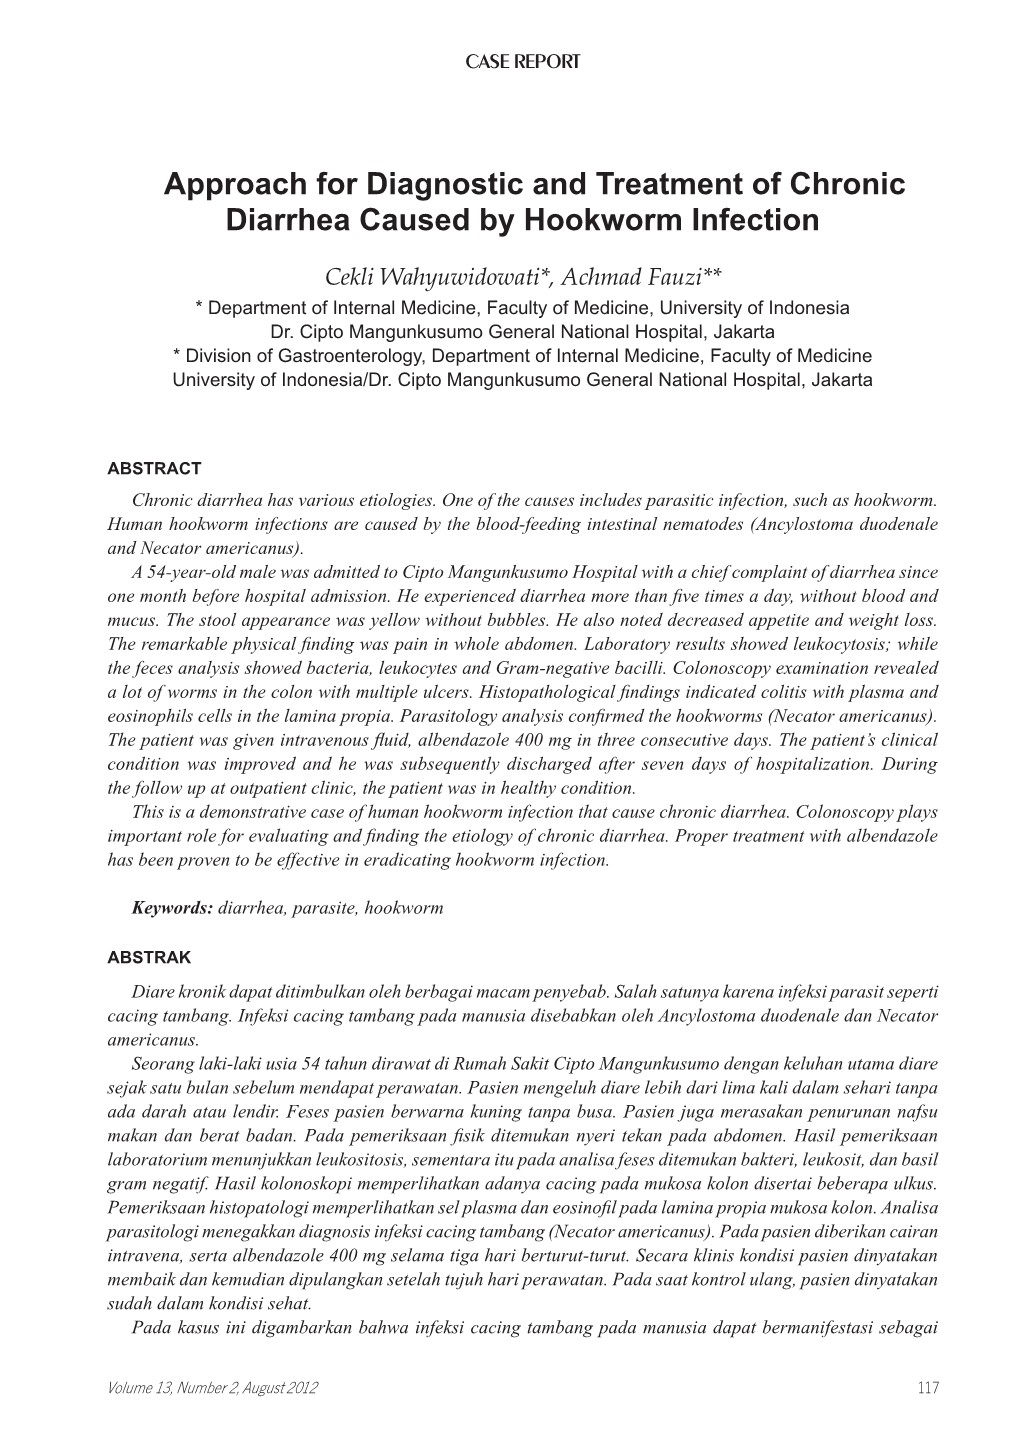 Approach for Diagnostic and Treatment of Chronic Diarrhea Caused by Hookworm Infection